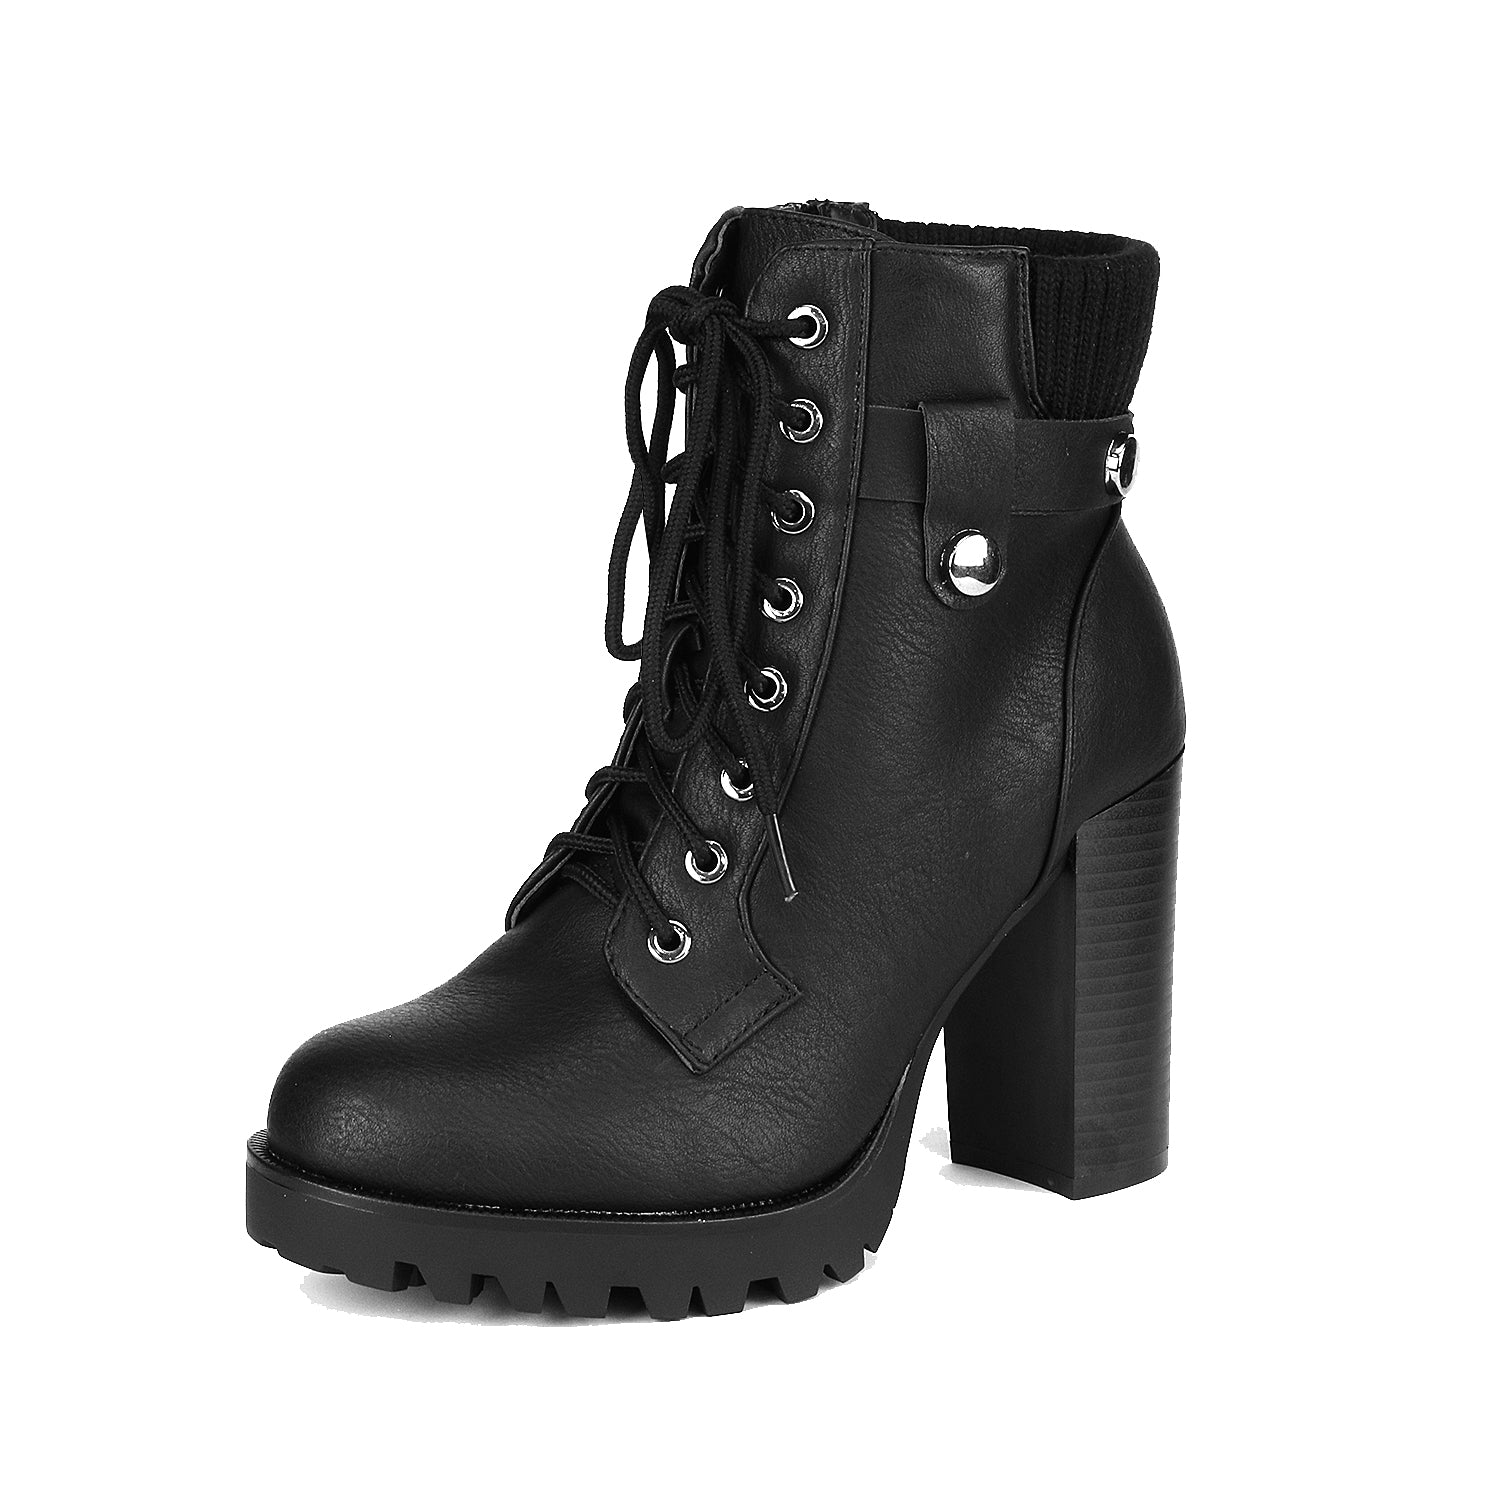 DREAM PAIRS Women’s Ankle Boots